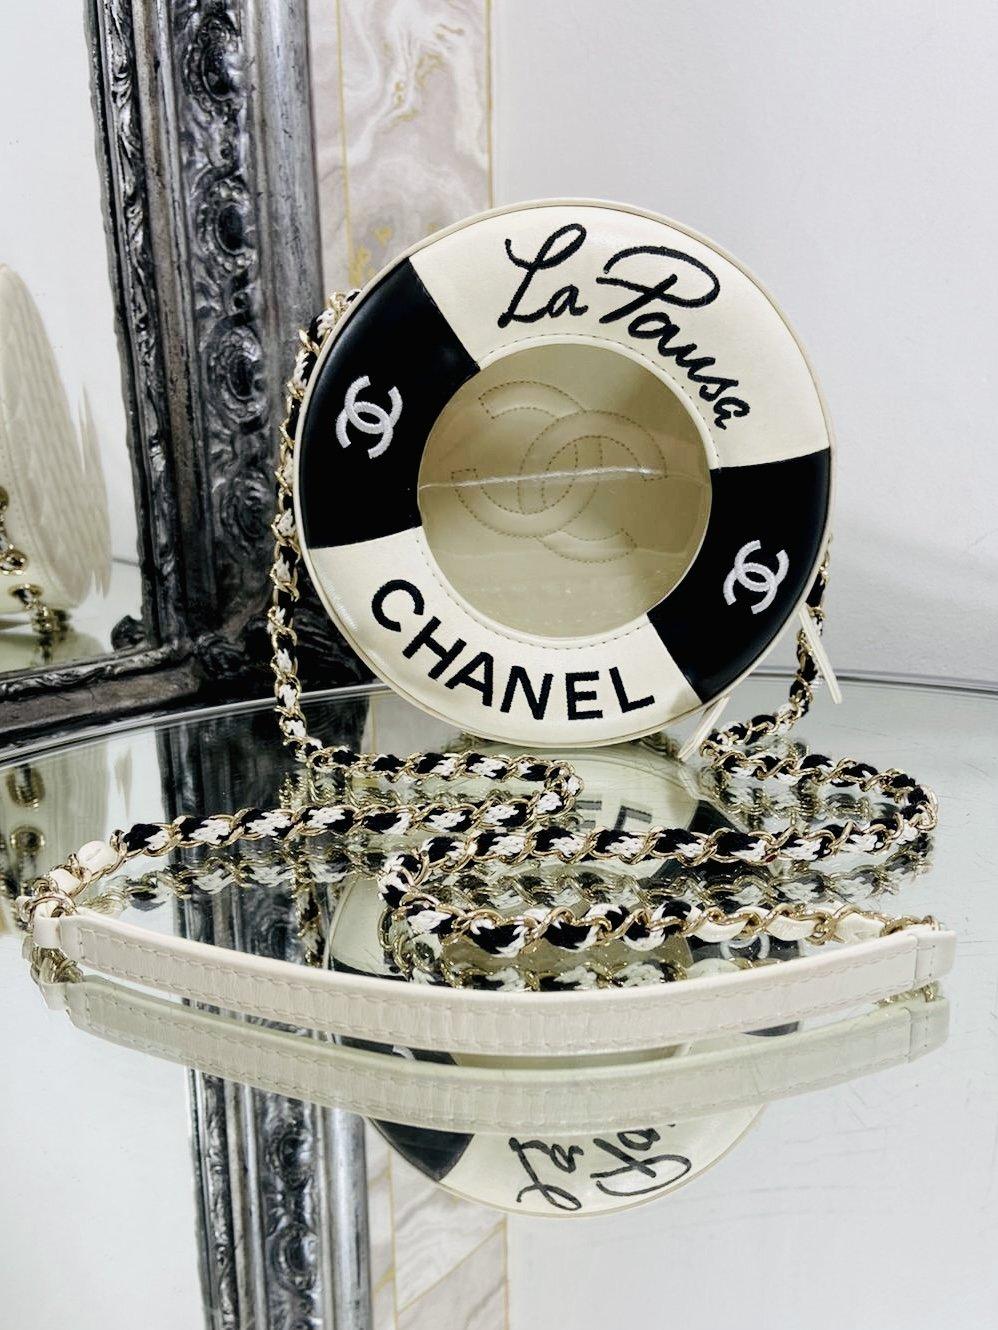 Chanel Ltd Edition La Pausa Rescue Buoy Bag 

From 2019 collection in black and white leather with gold hardware. Embroidered 'CC' logos and  detailing to the front with a diamond stitch bag. Cross body strap with the all important chain and leather